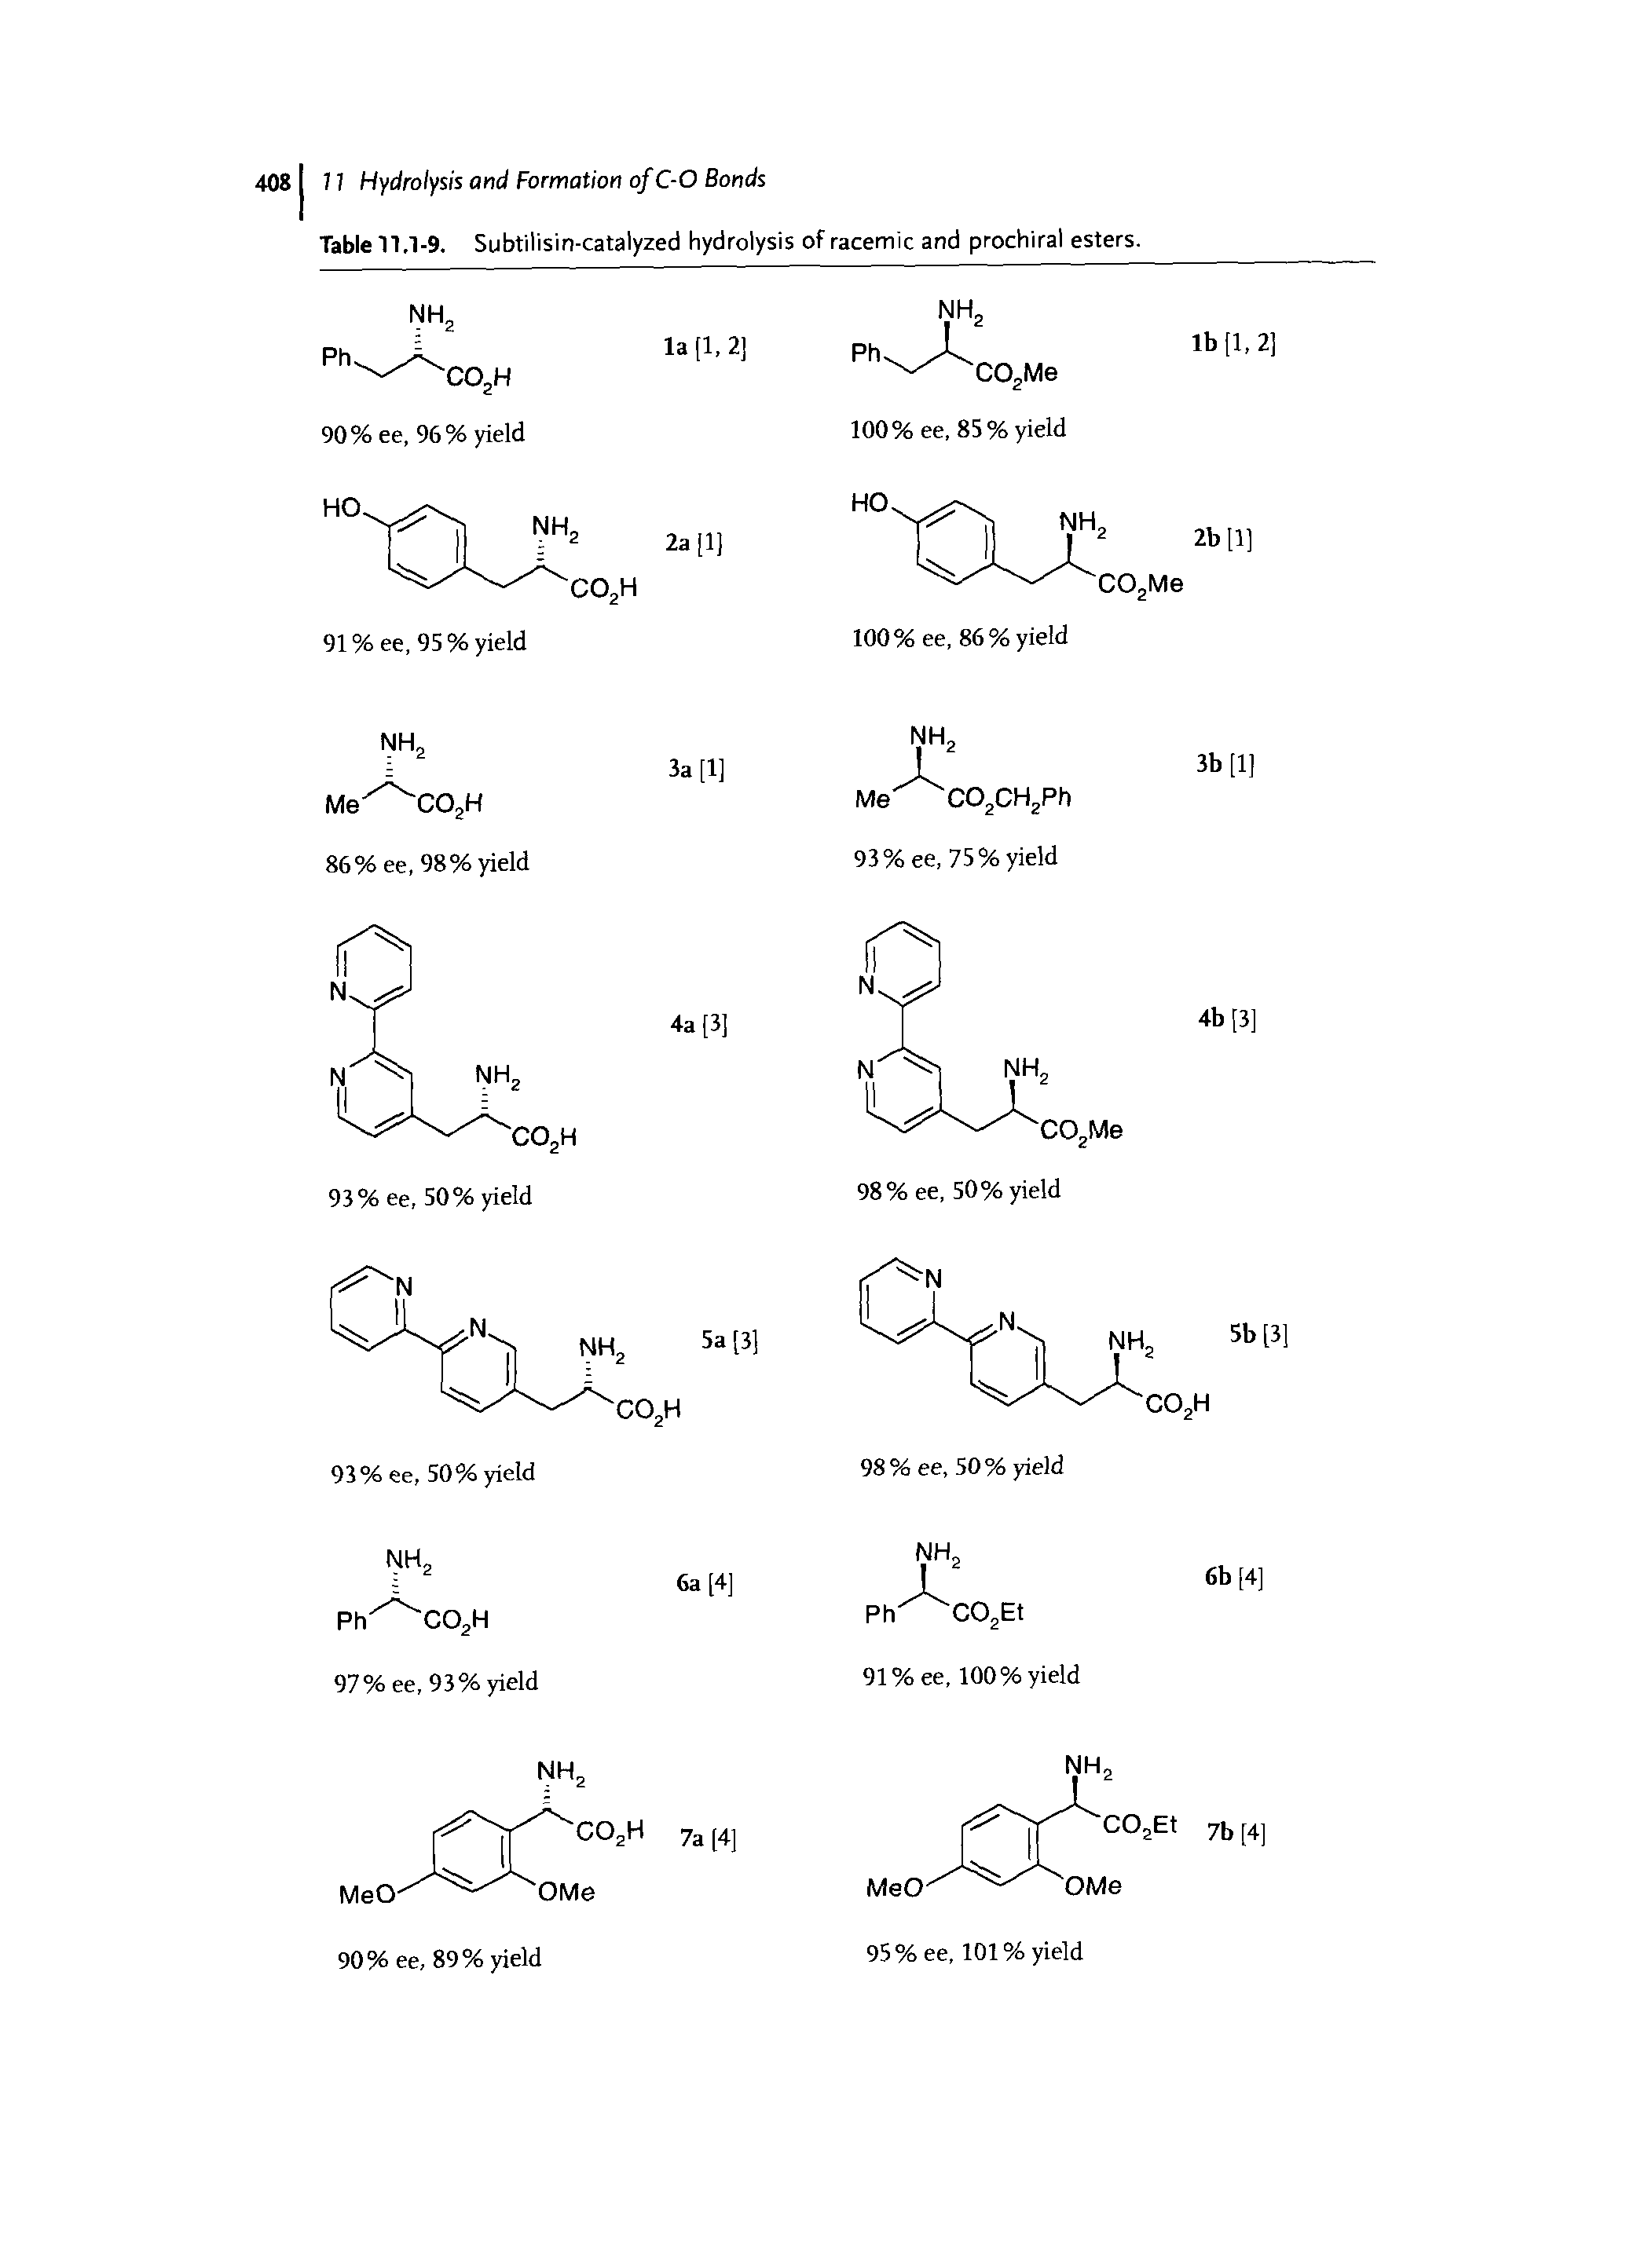 Table 11.1-9. Subtilisin-catalyzed hydrolysis of racemic and prochiral esters.